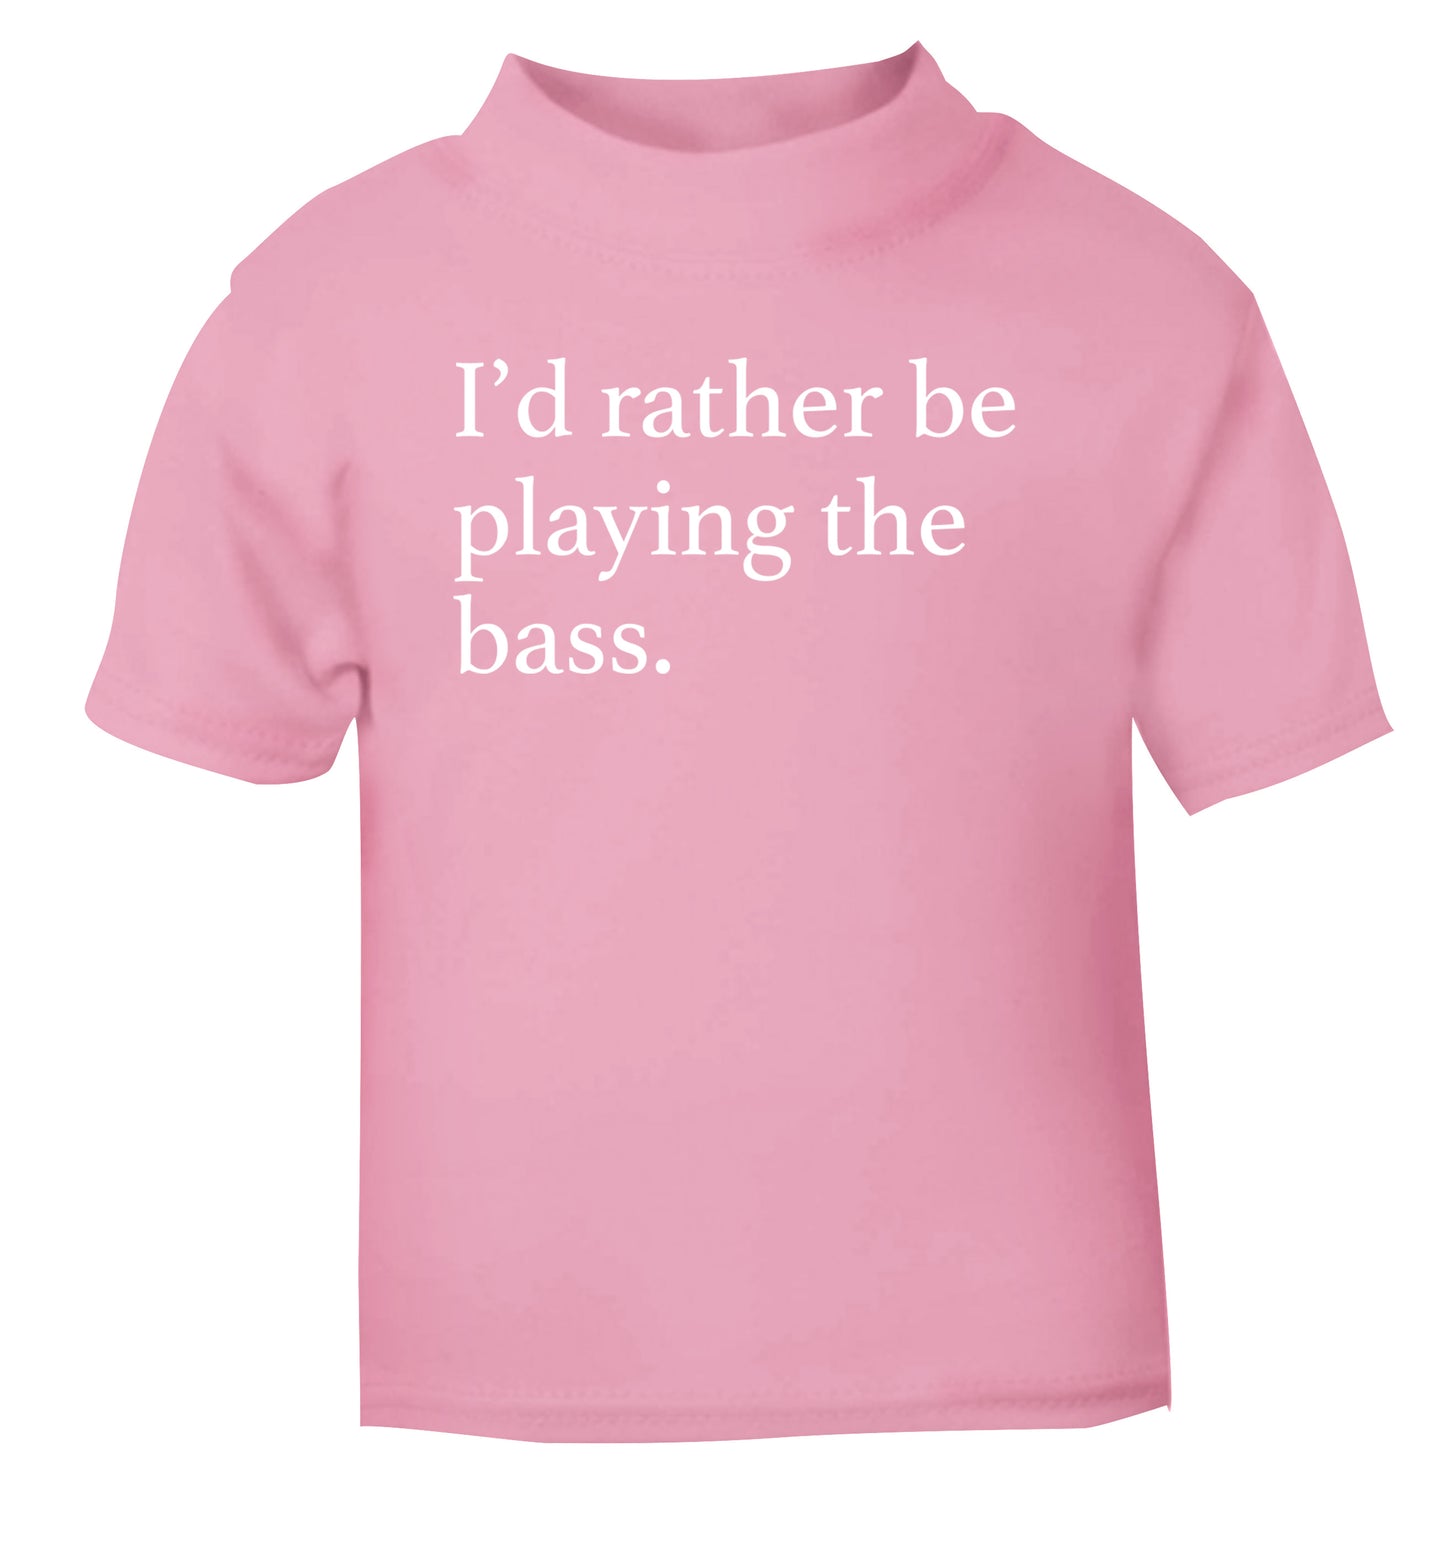 I'd rather by playing the bass light pink Baby Toddler Tshirt 2 Years